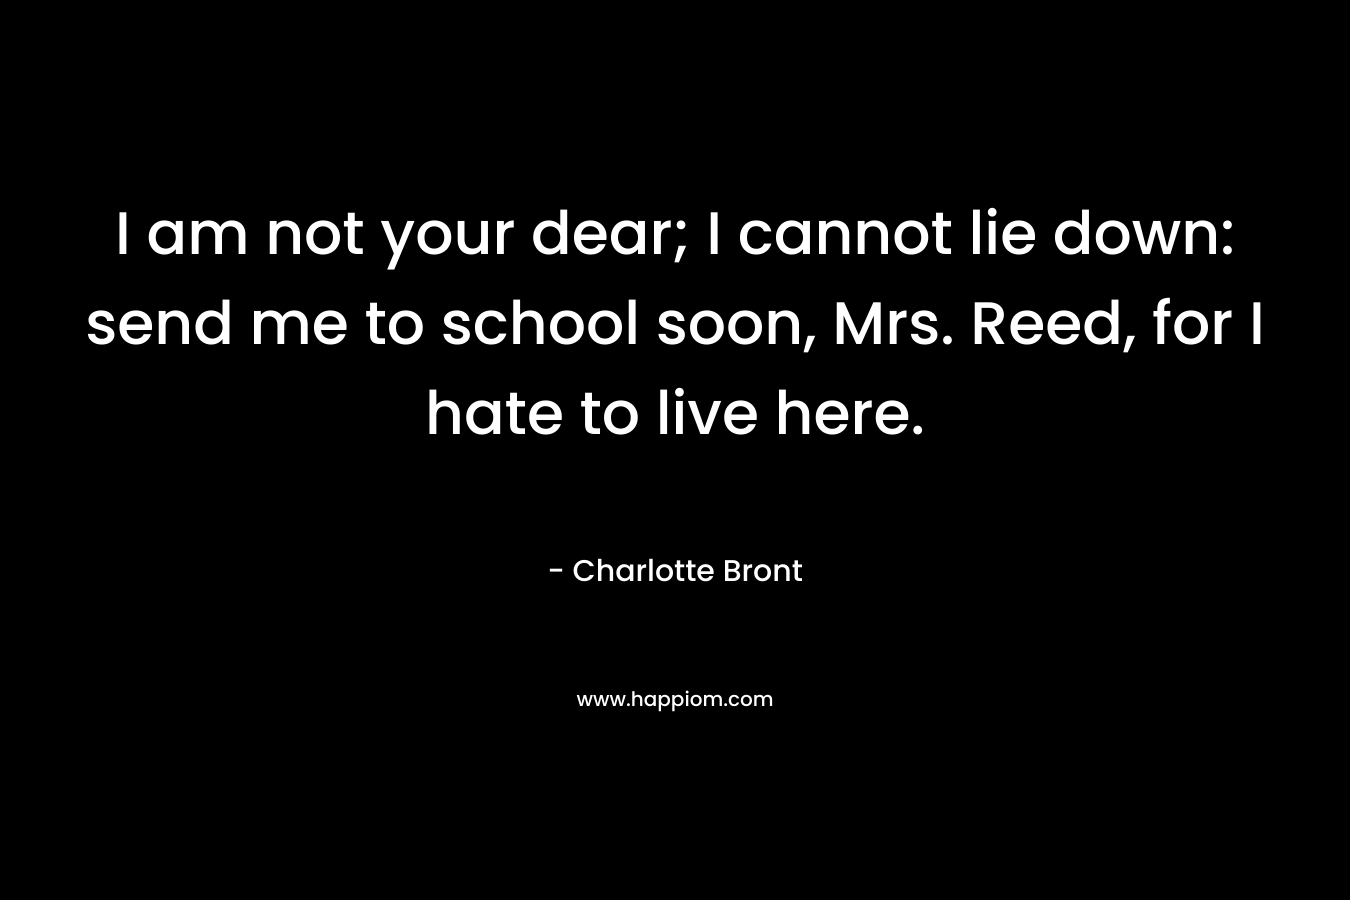 I am not your dear; I cannot lie down: send me to school soon, Mrs. Reed, for I hate to live here. – Charlotte Bront